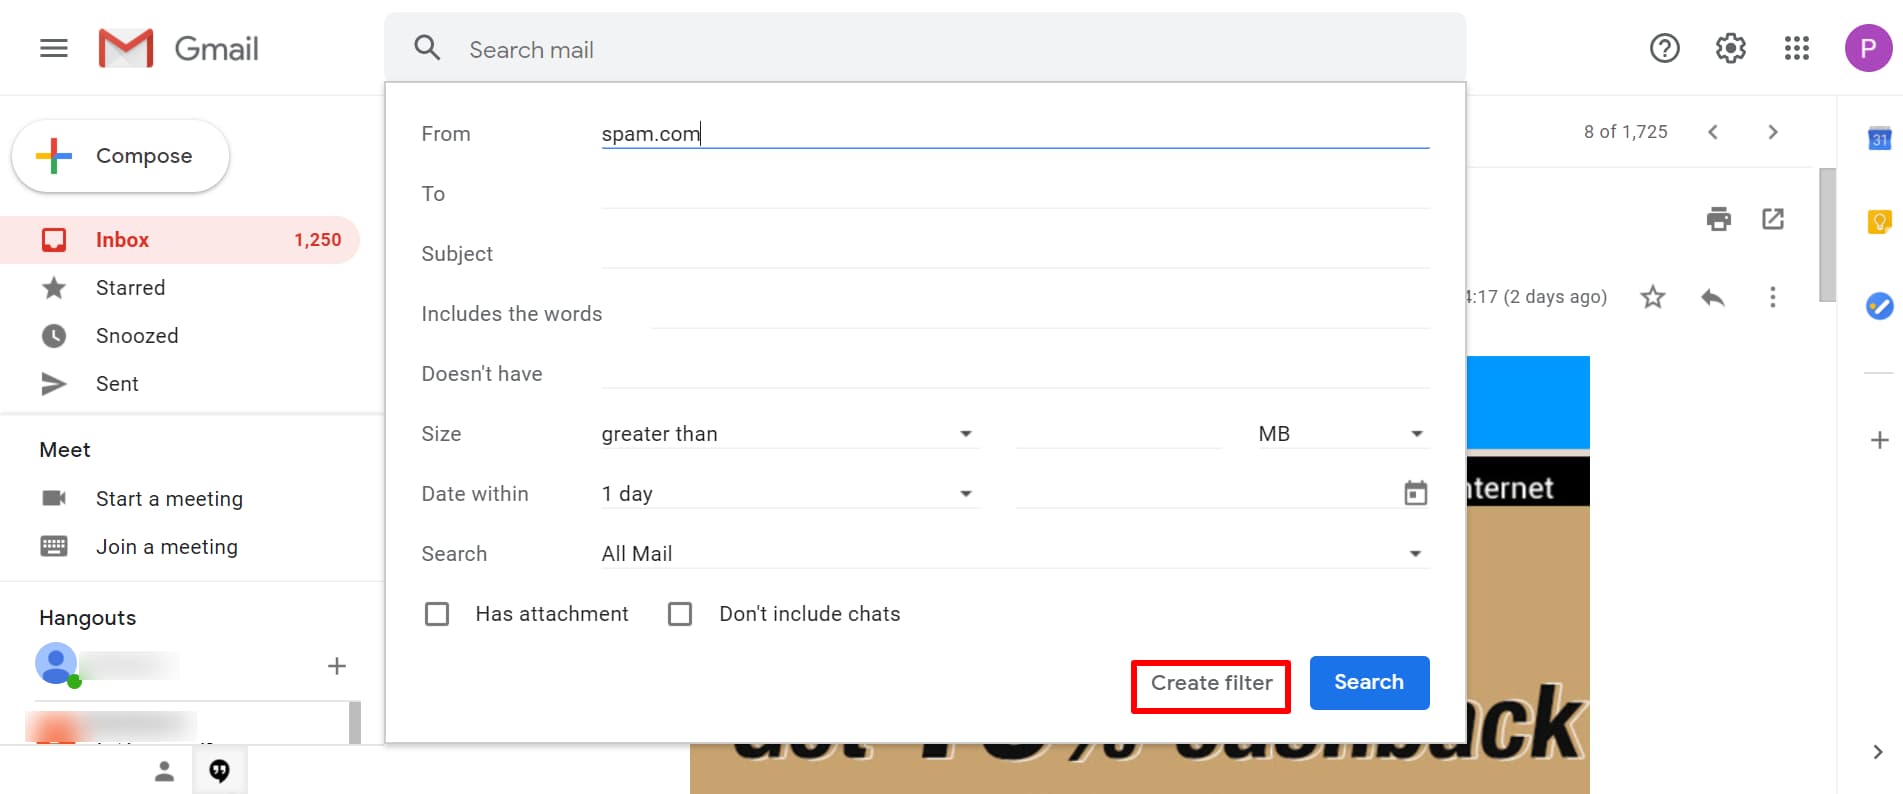 how to block email on gmail: tap "create filter"